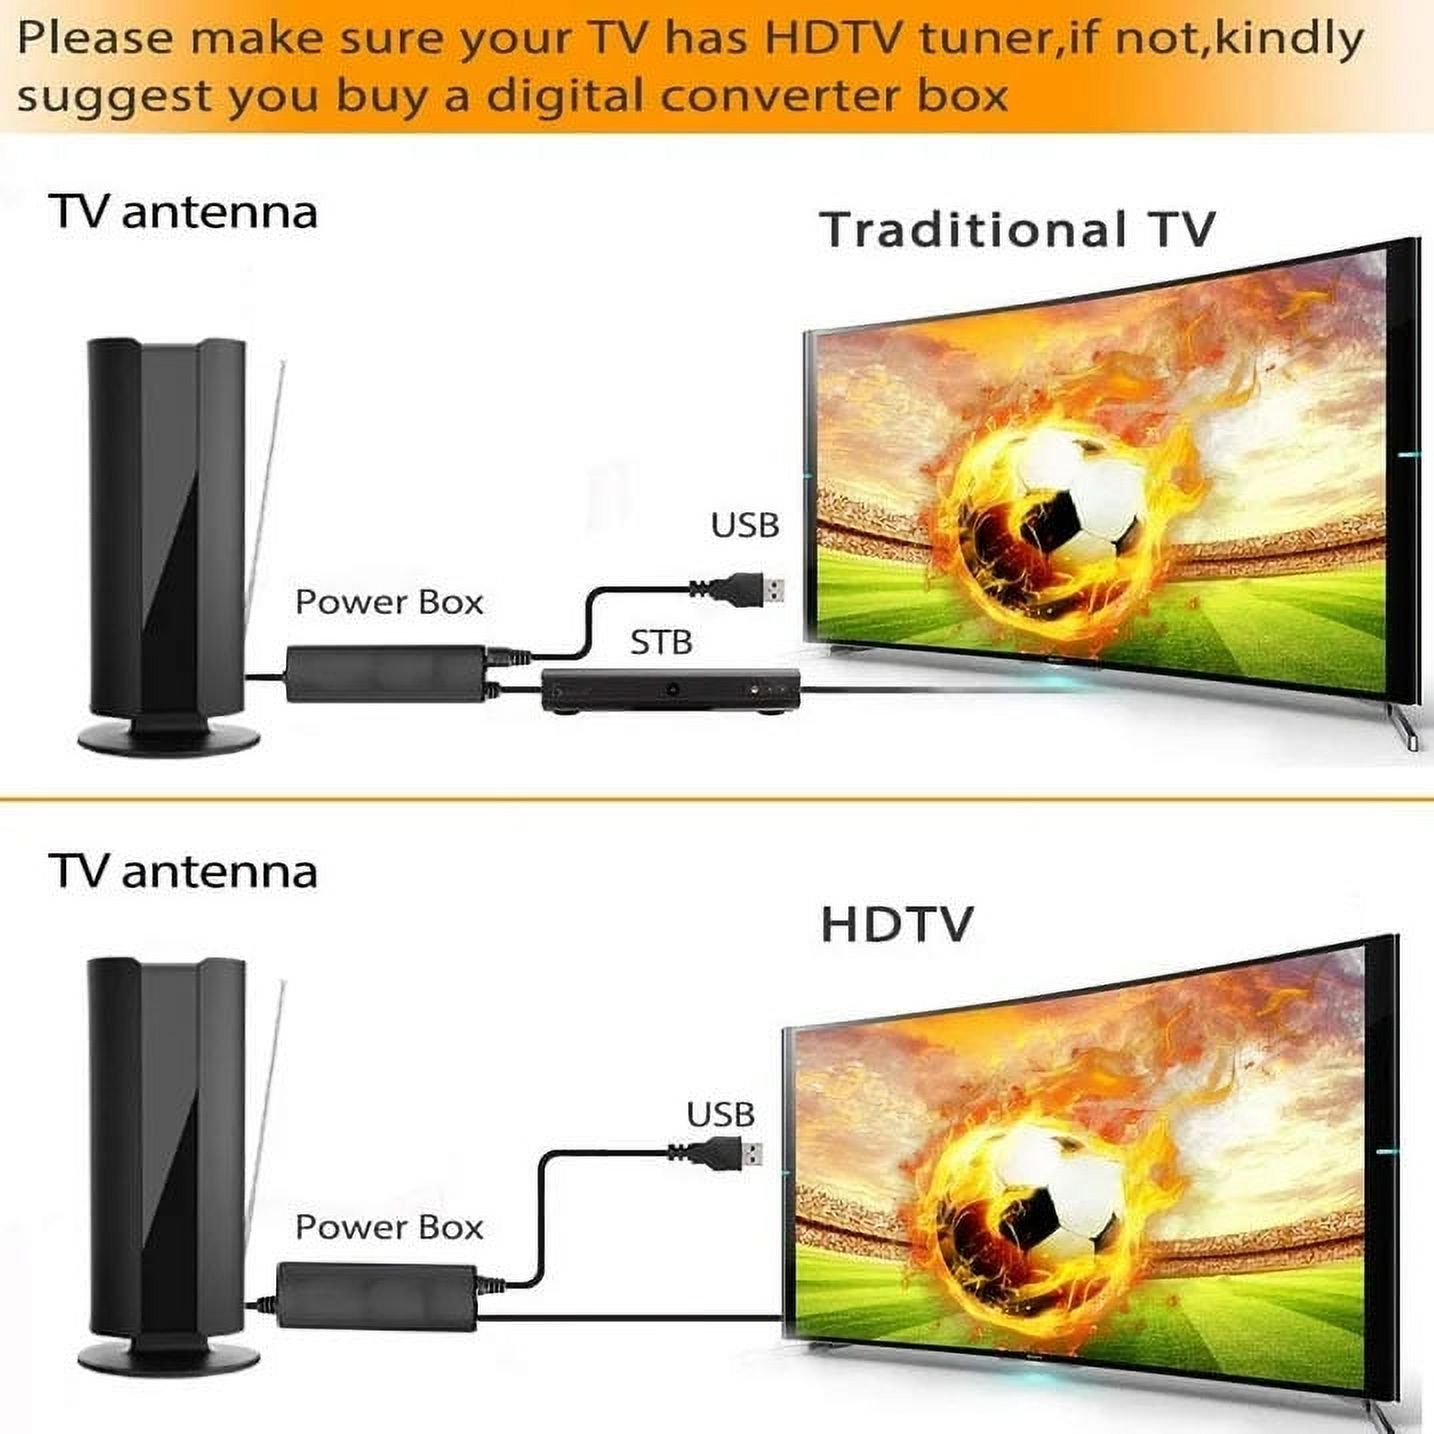 TV Antenna, 2023 Newest HDTV Antenna Support 4K 1080P, Upgraded Amplified Signal Booster HD Digital TV Antenna Long 150 Miles Range, UHF VHF Freeview HDTV Channels with 14.8ft Coax Cable - image 2 of 9